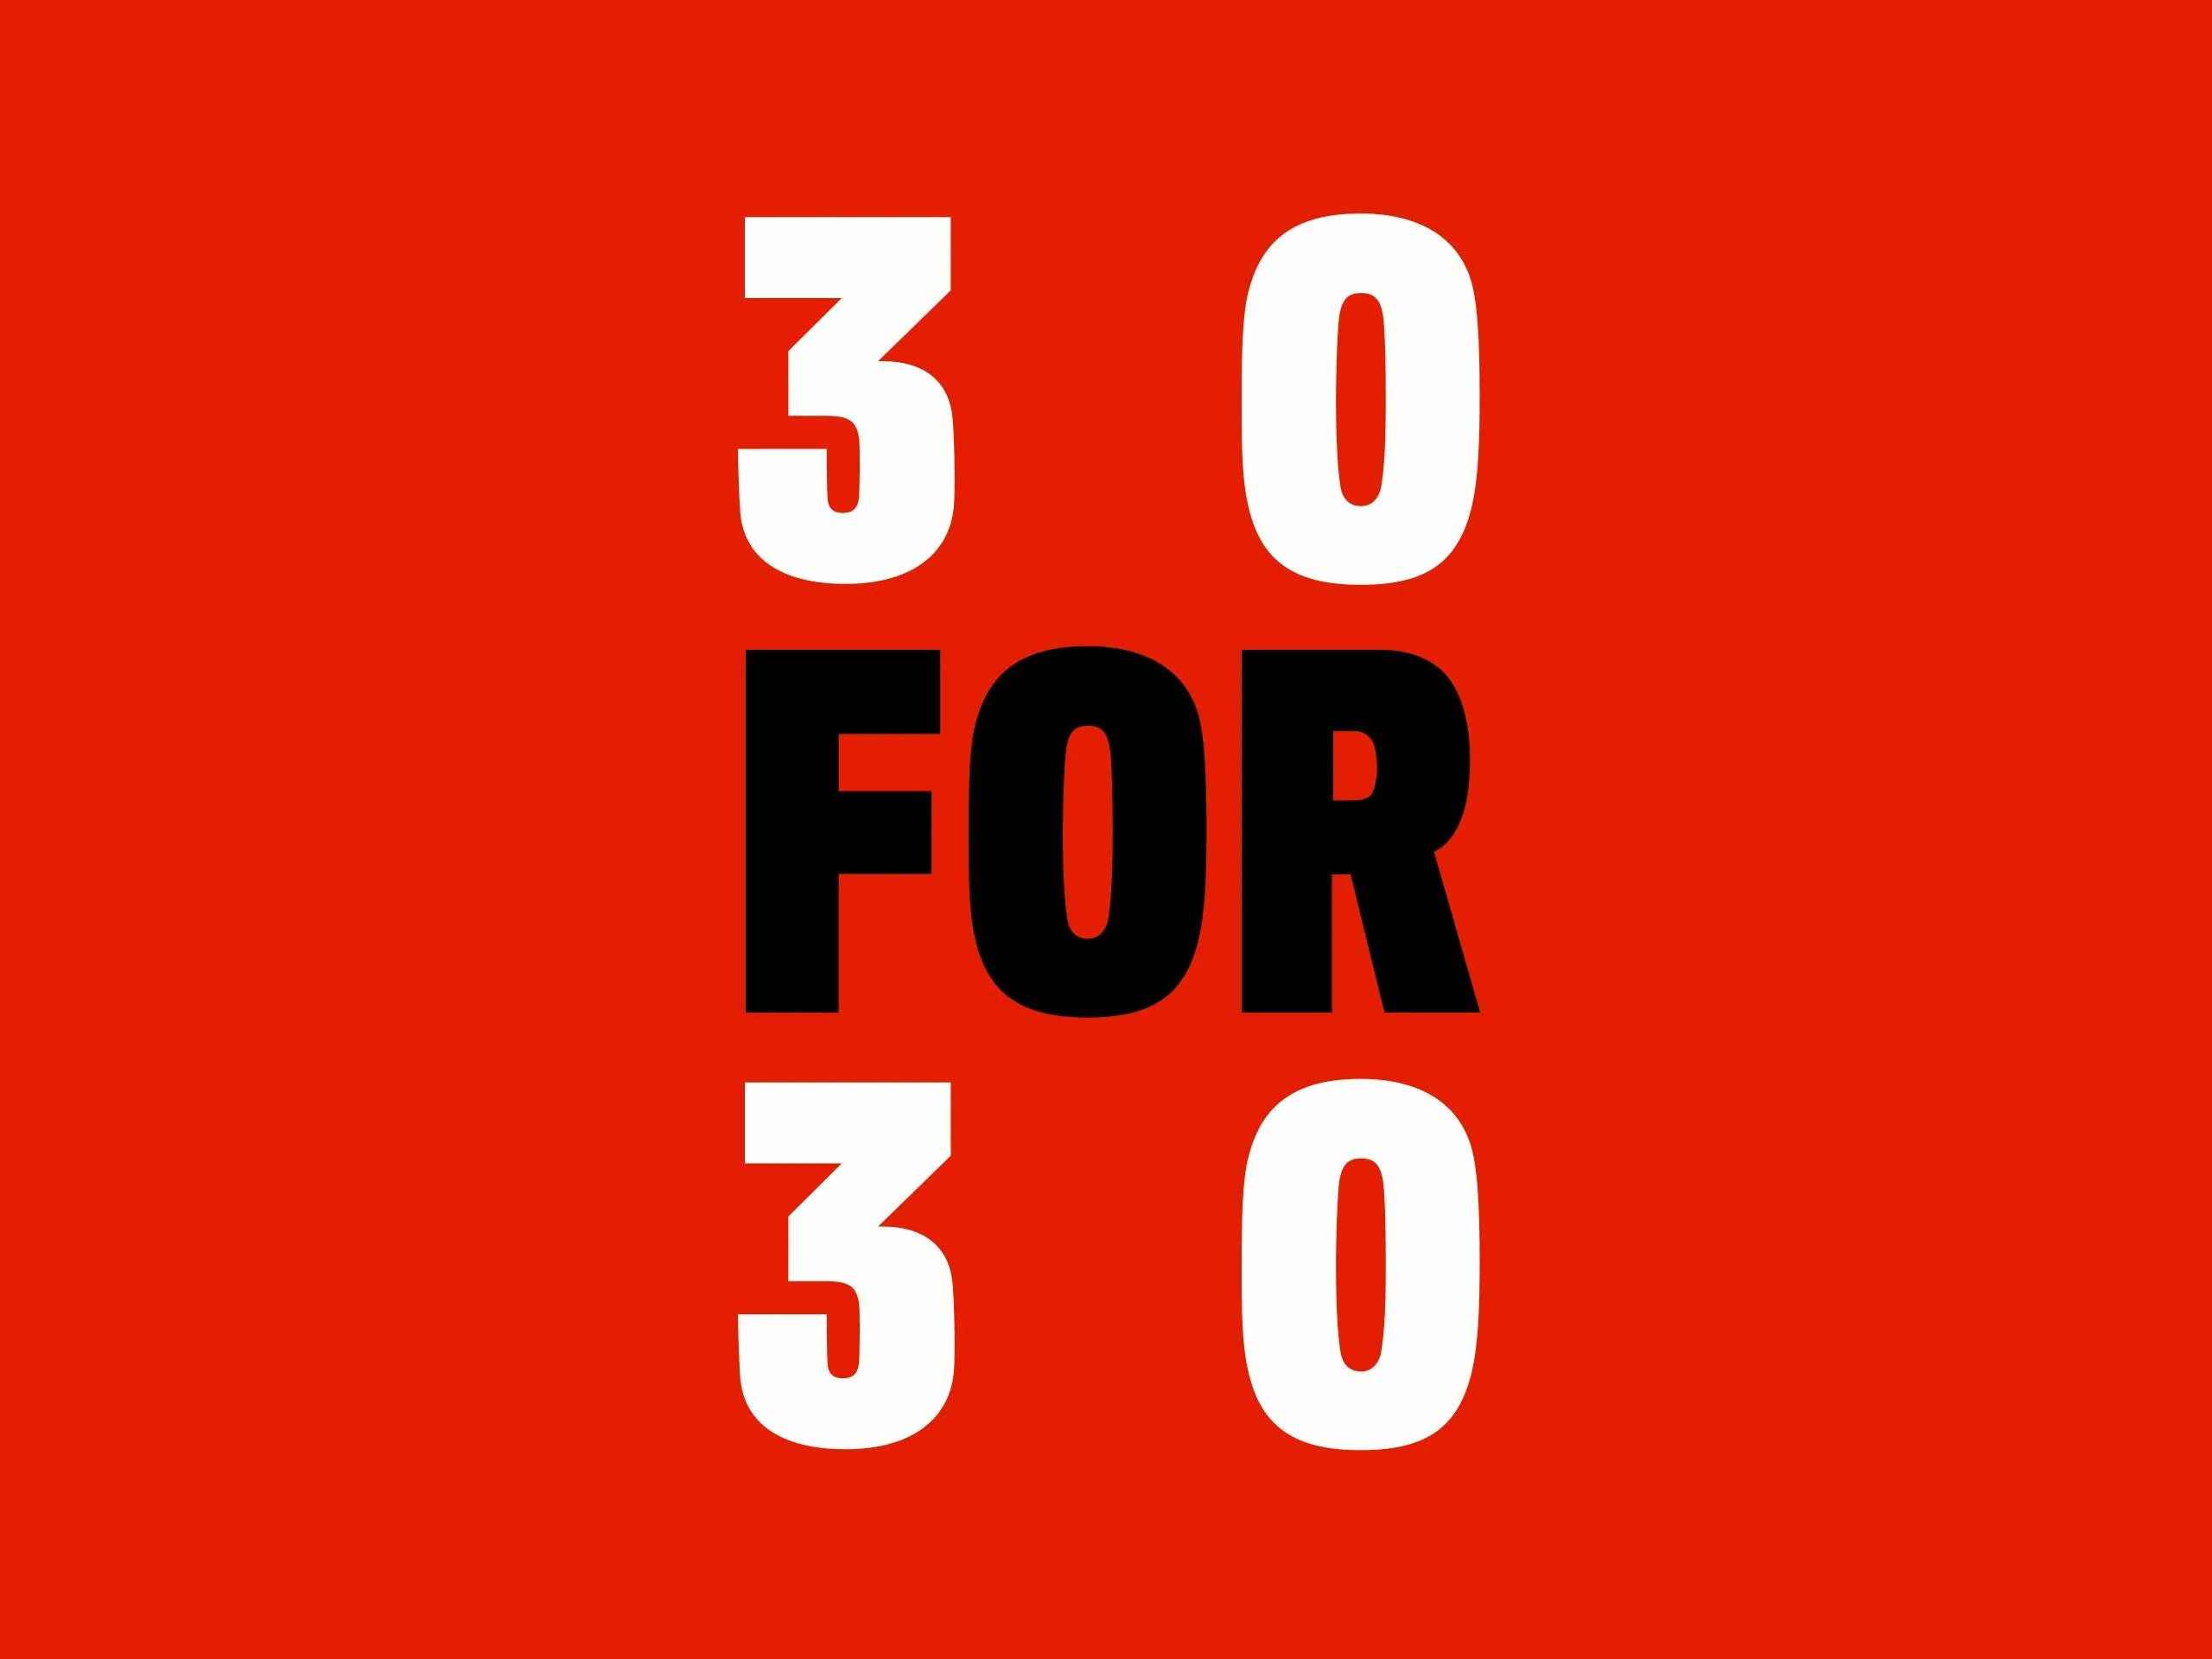 30 For. 30 For 30 s02e16. 30. 30 details